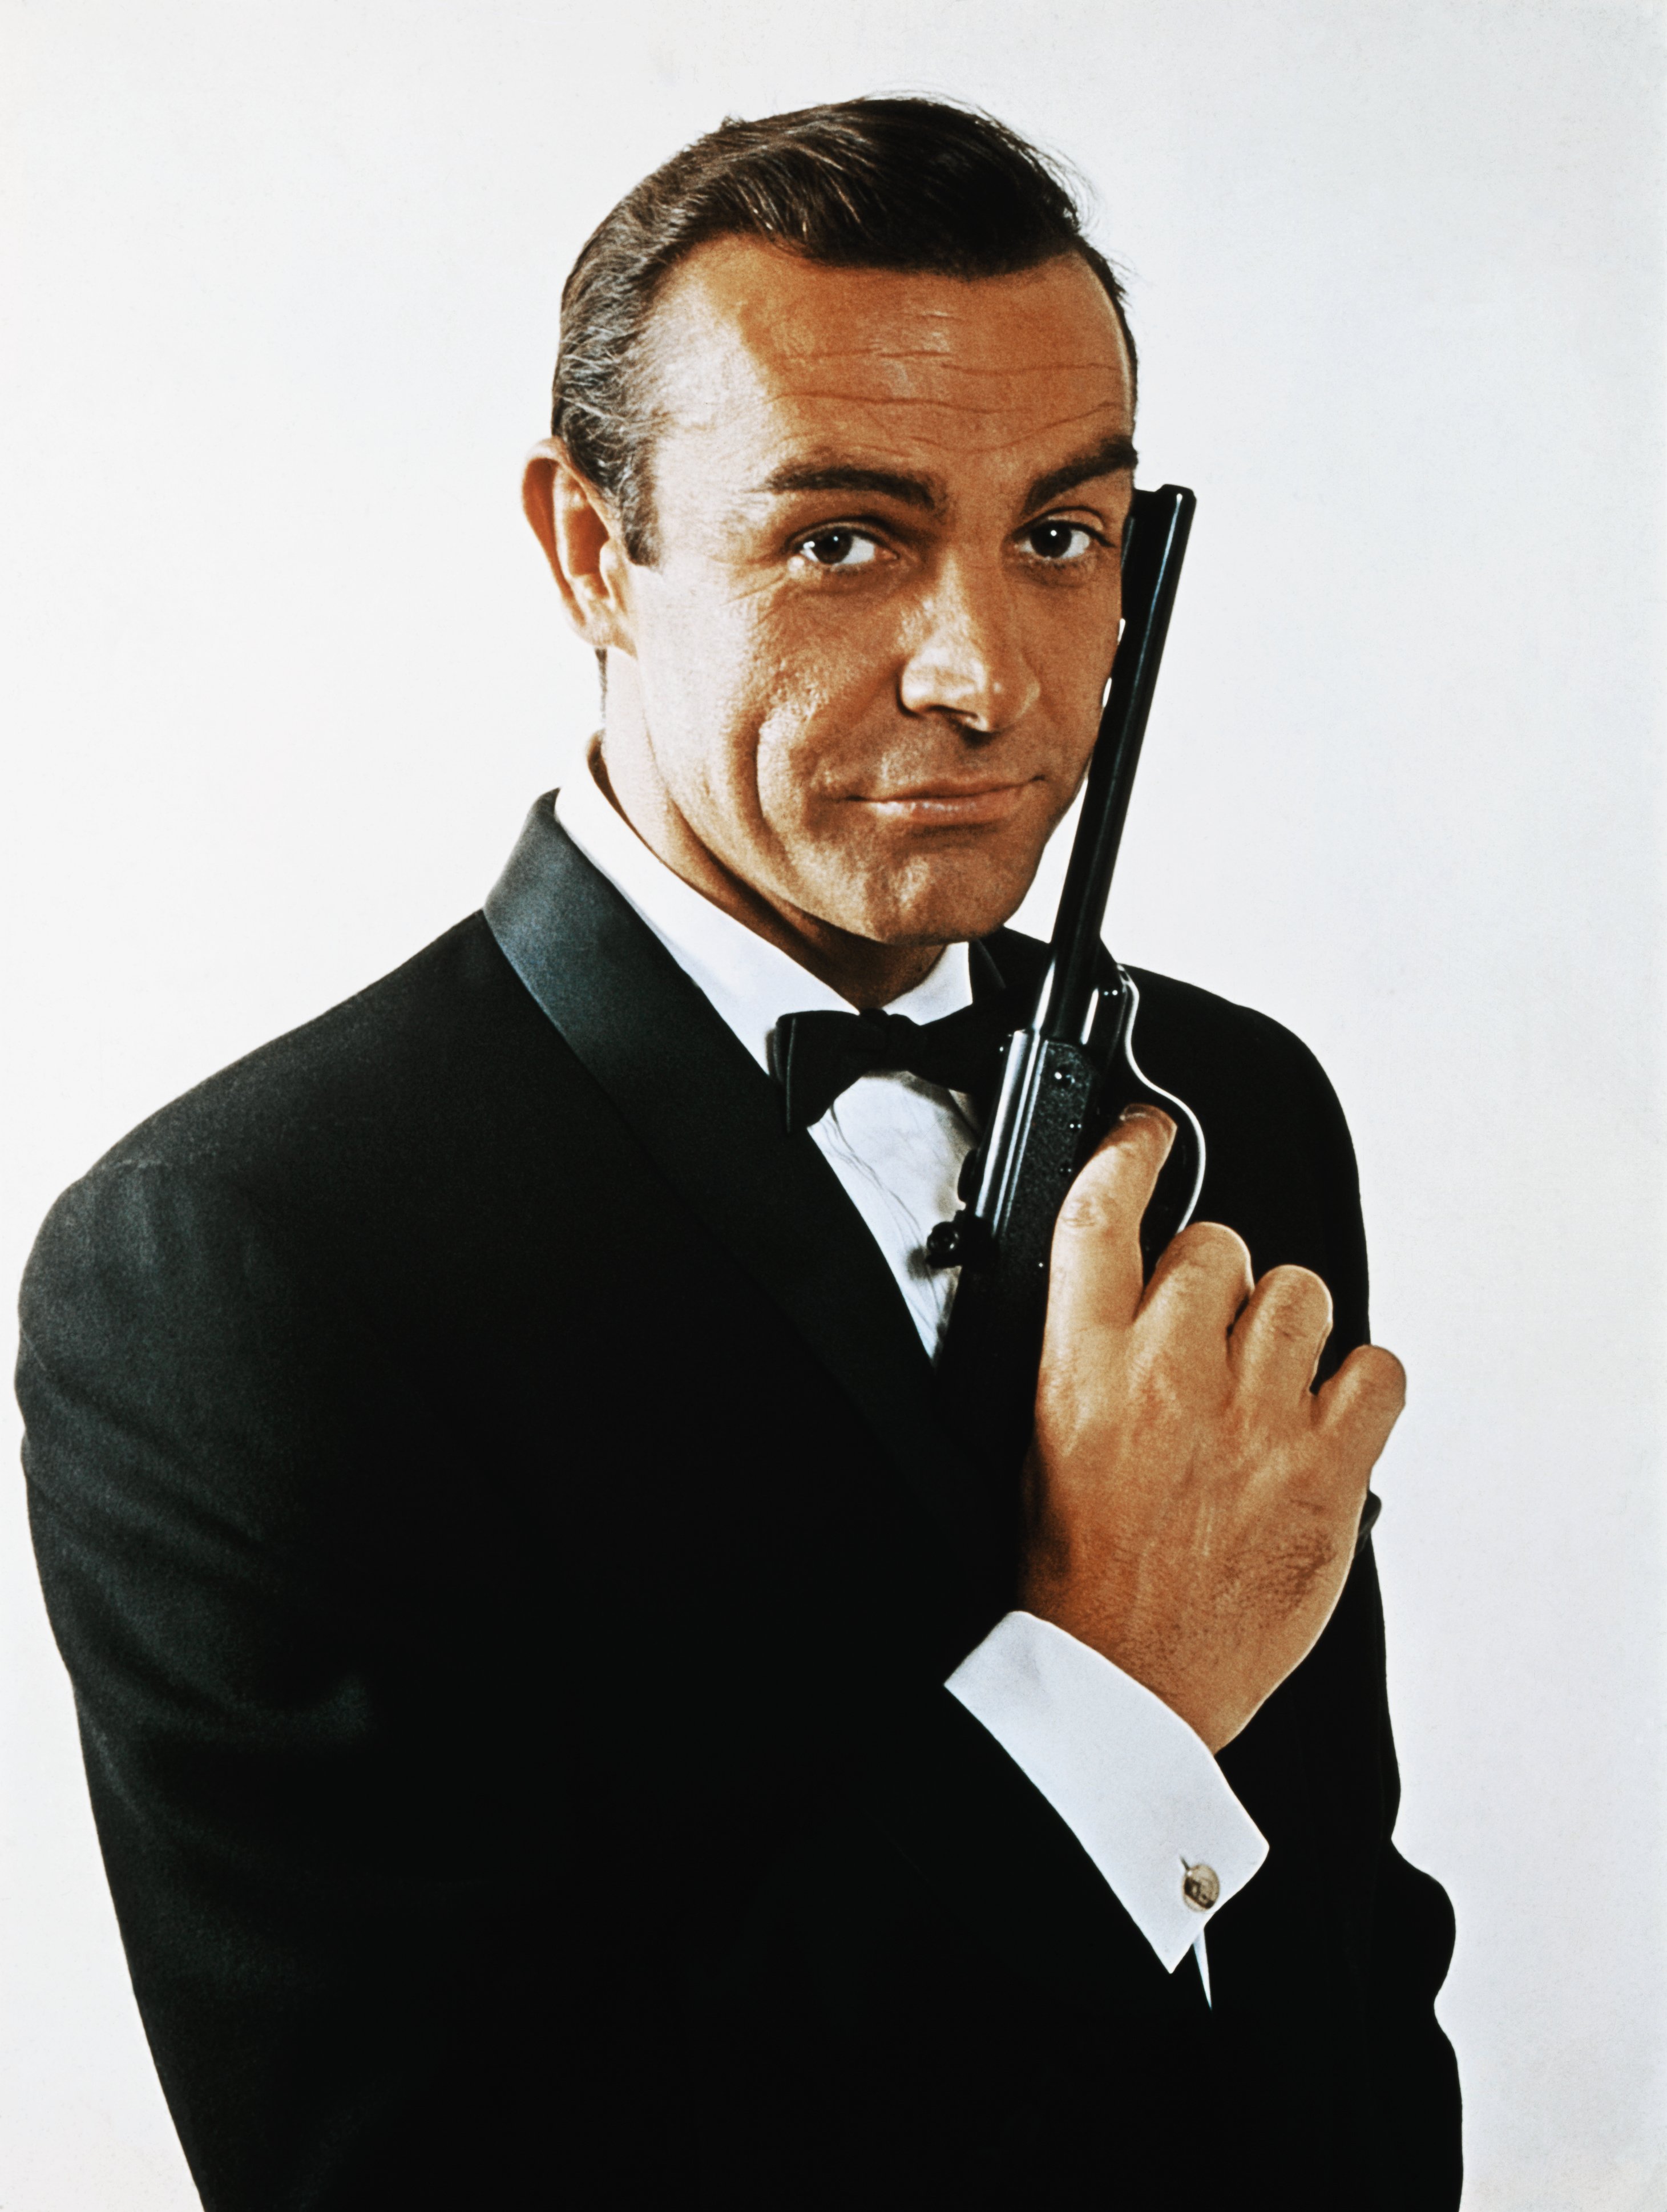 Sean Connery, as James Bond, in January 1968 | Source: Getty Images